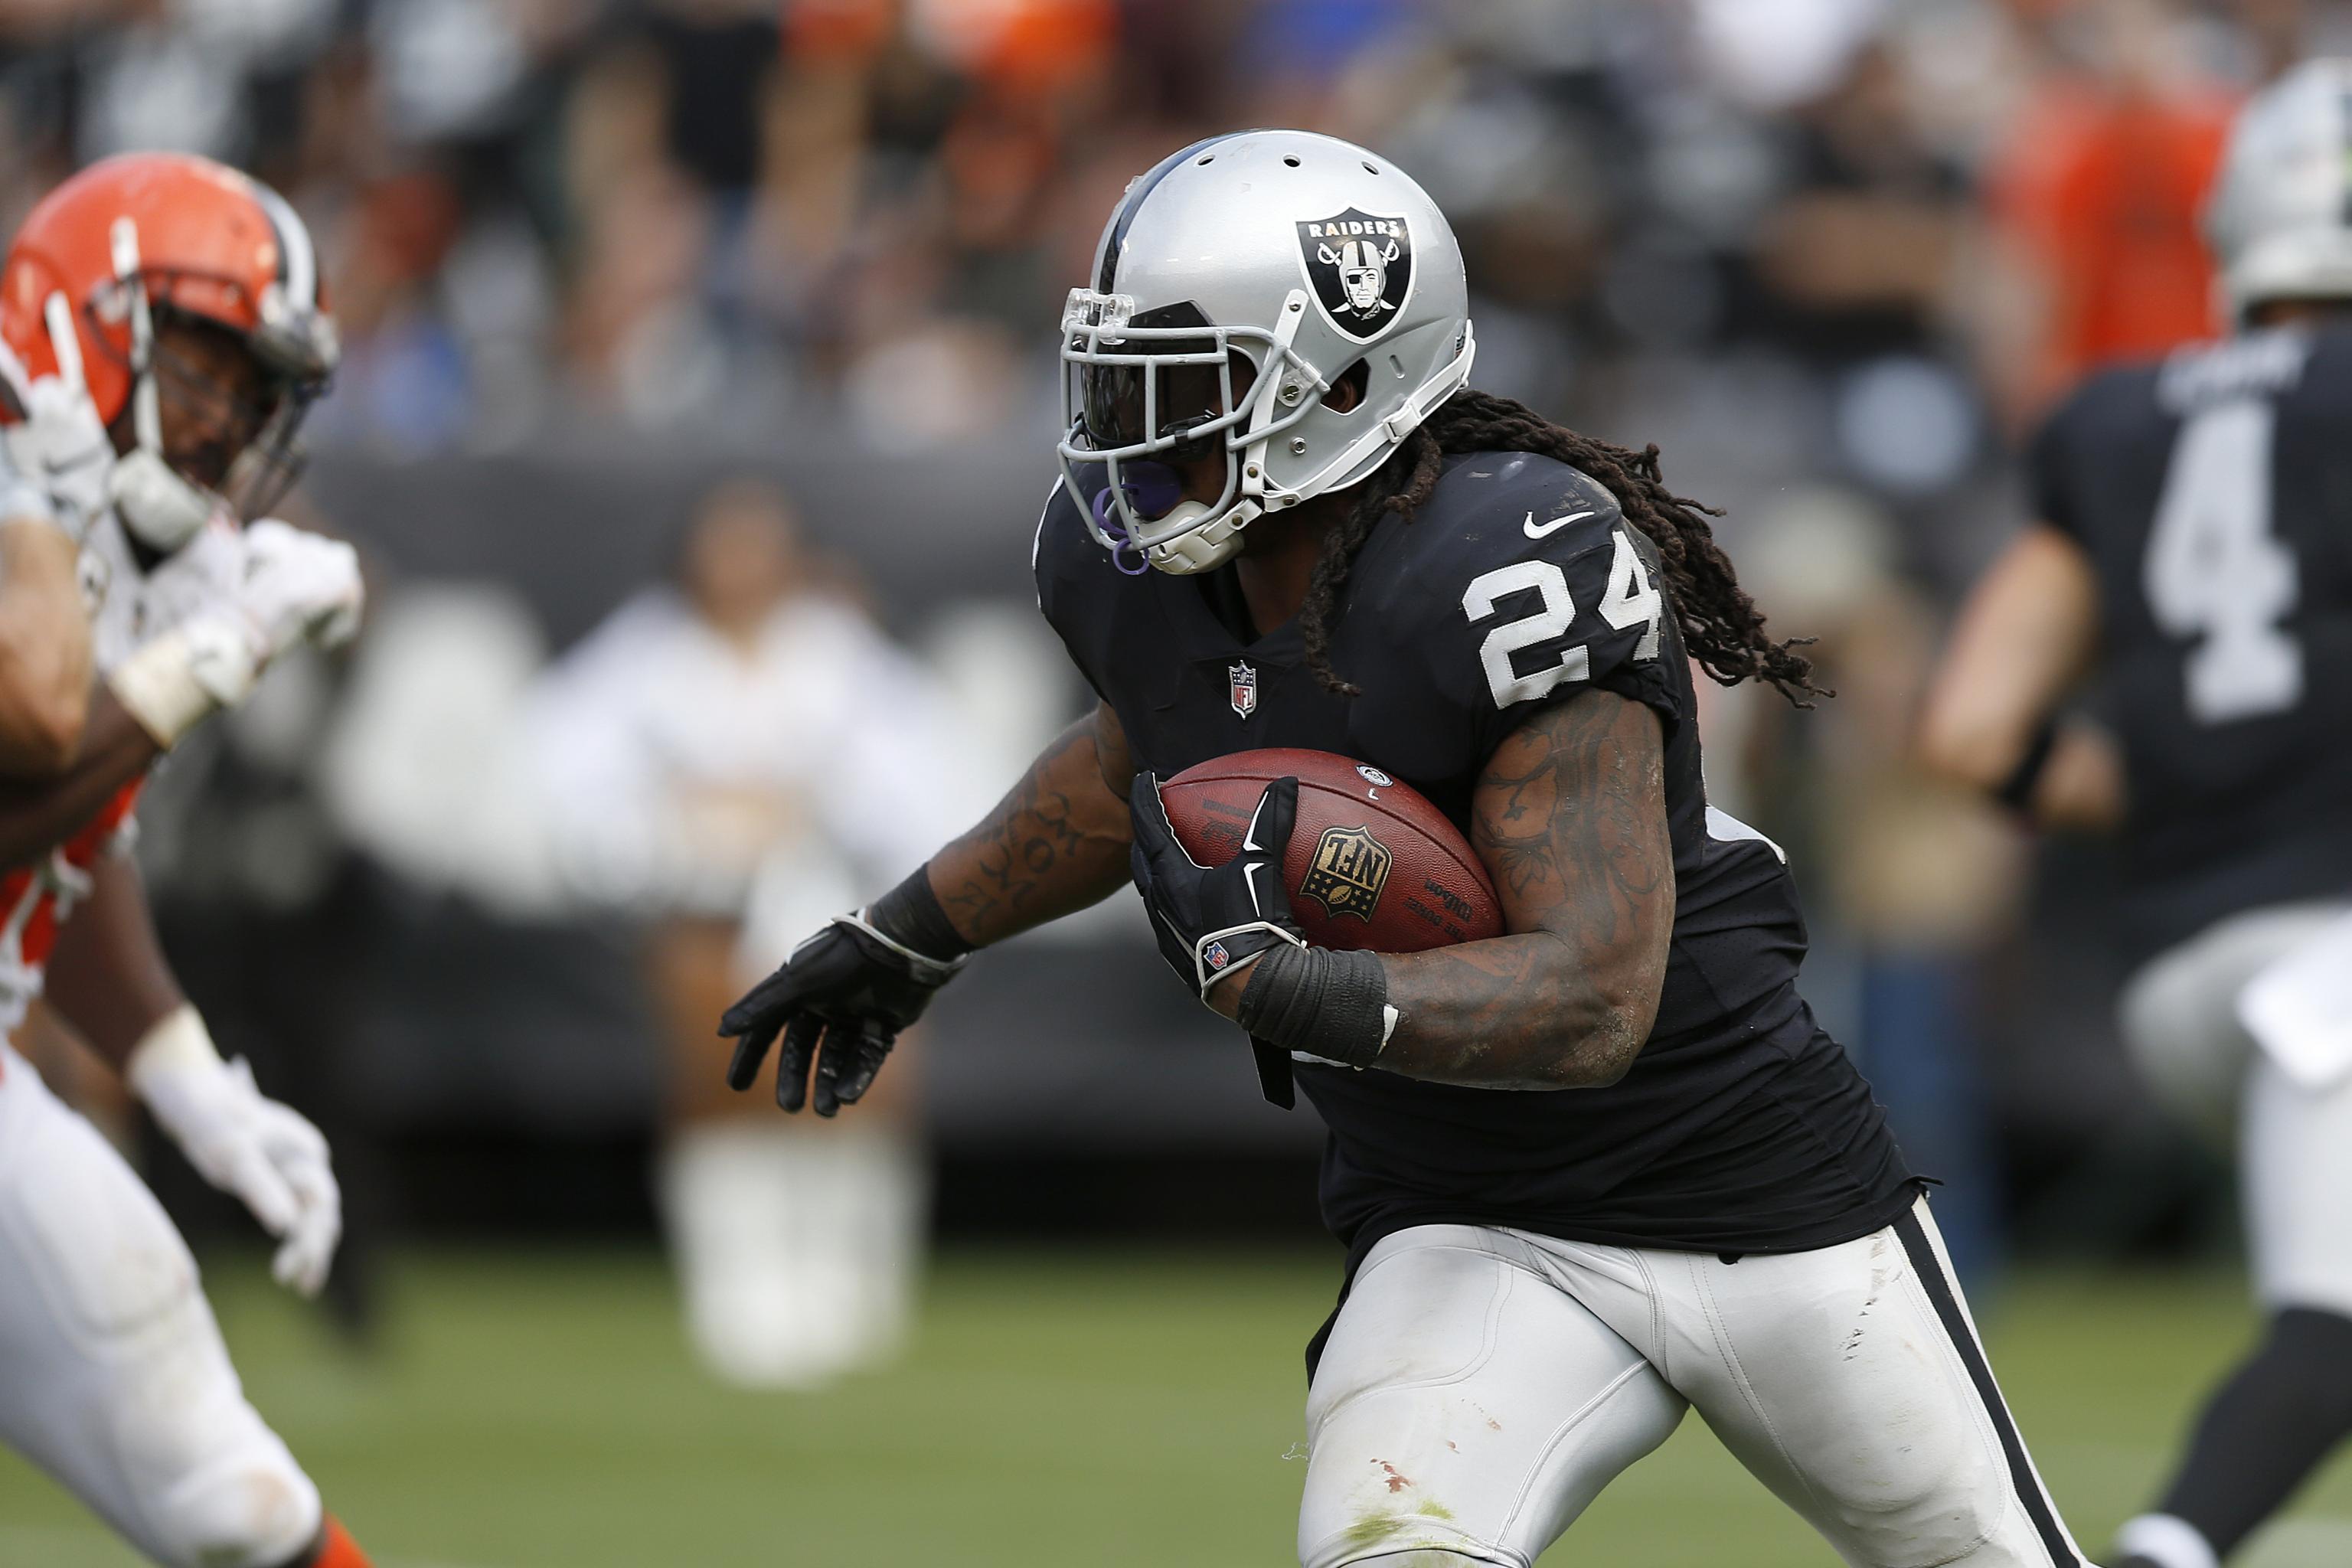 Marshawn Lynch emerges in Raiders gear for the first time - Field